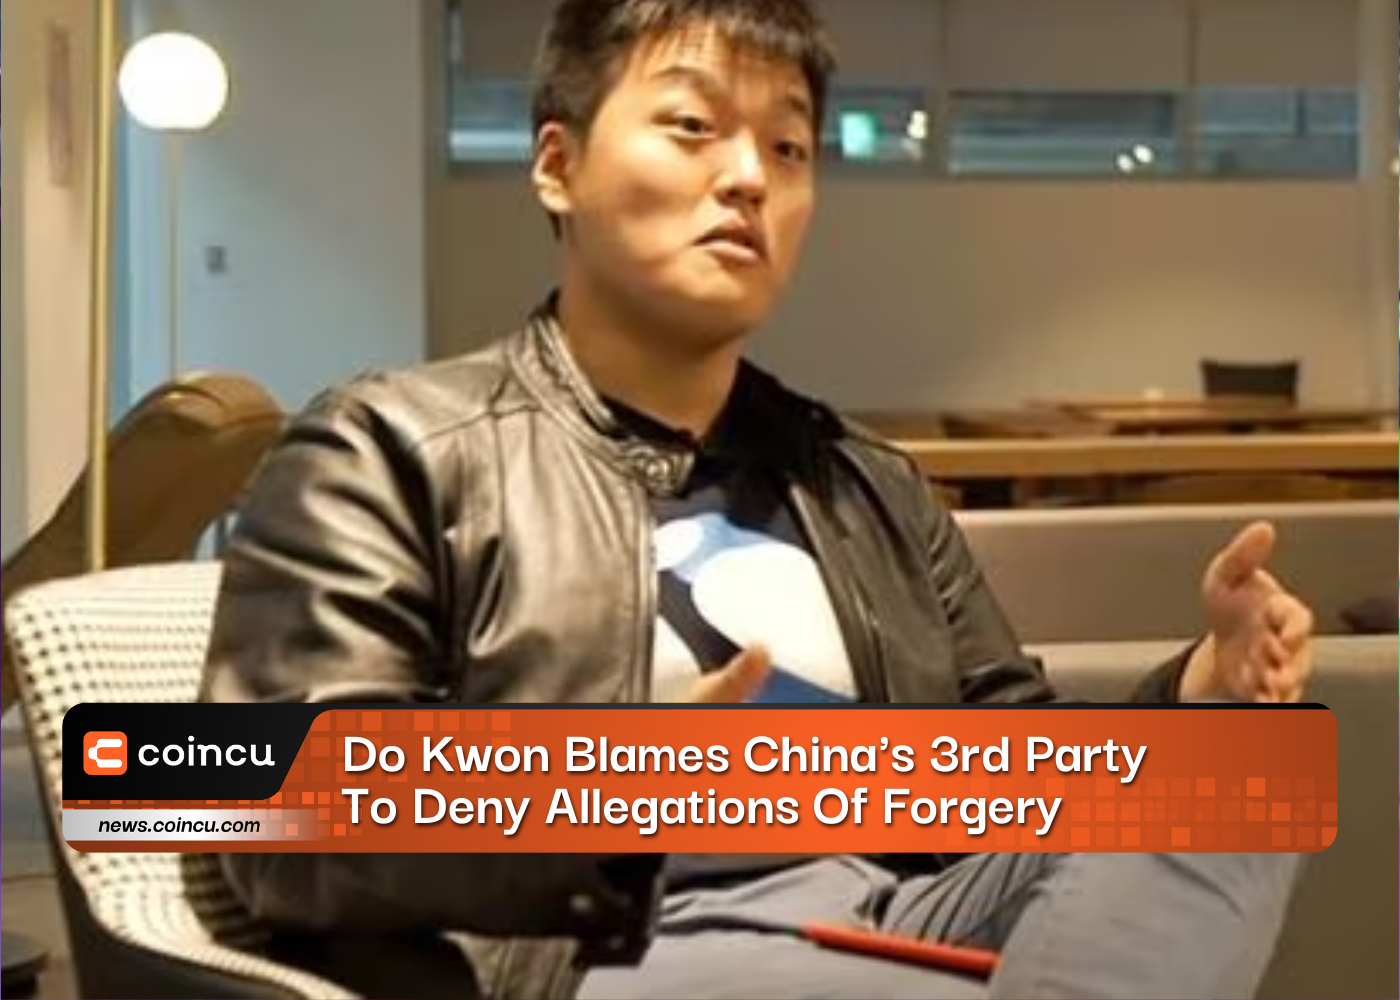 Do Kwon Blames China's 3rd Party To Deny Allegations Of Forgery